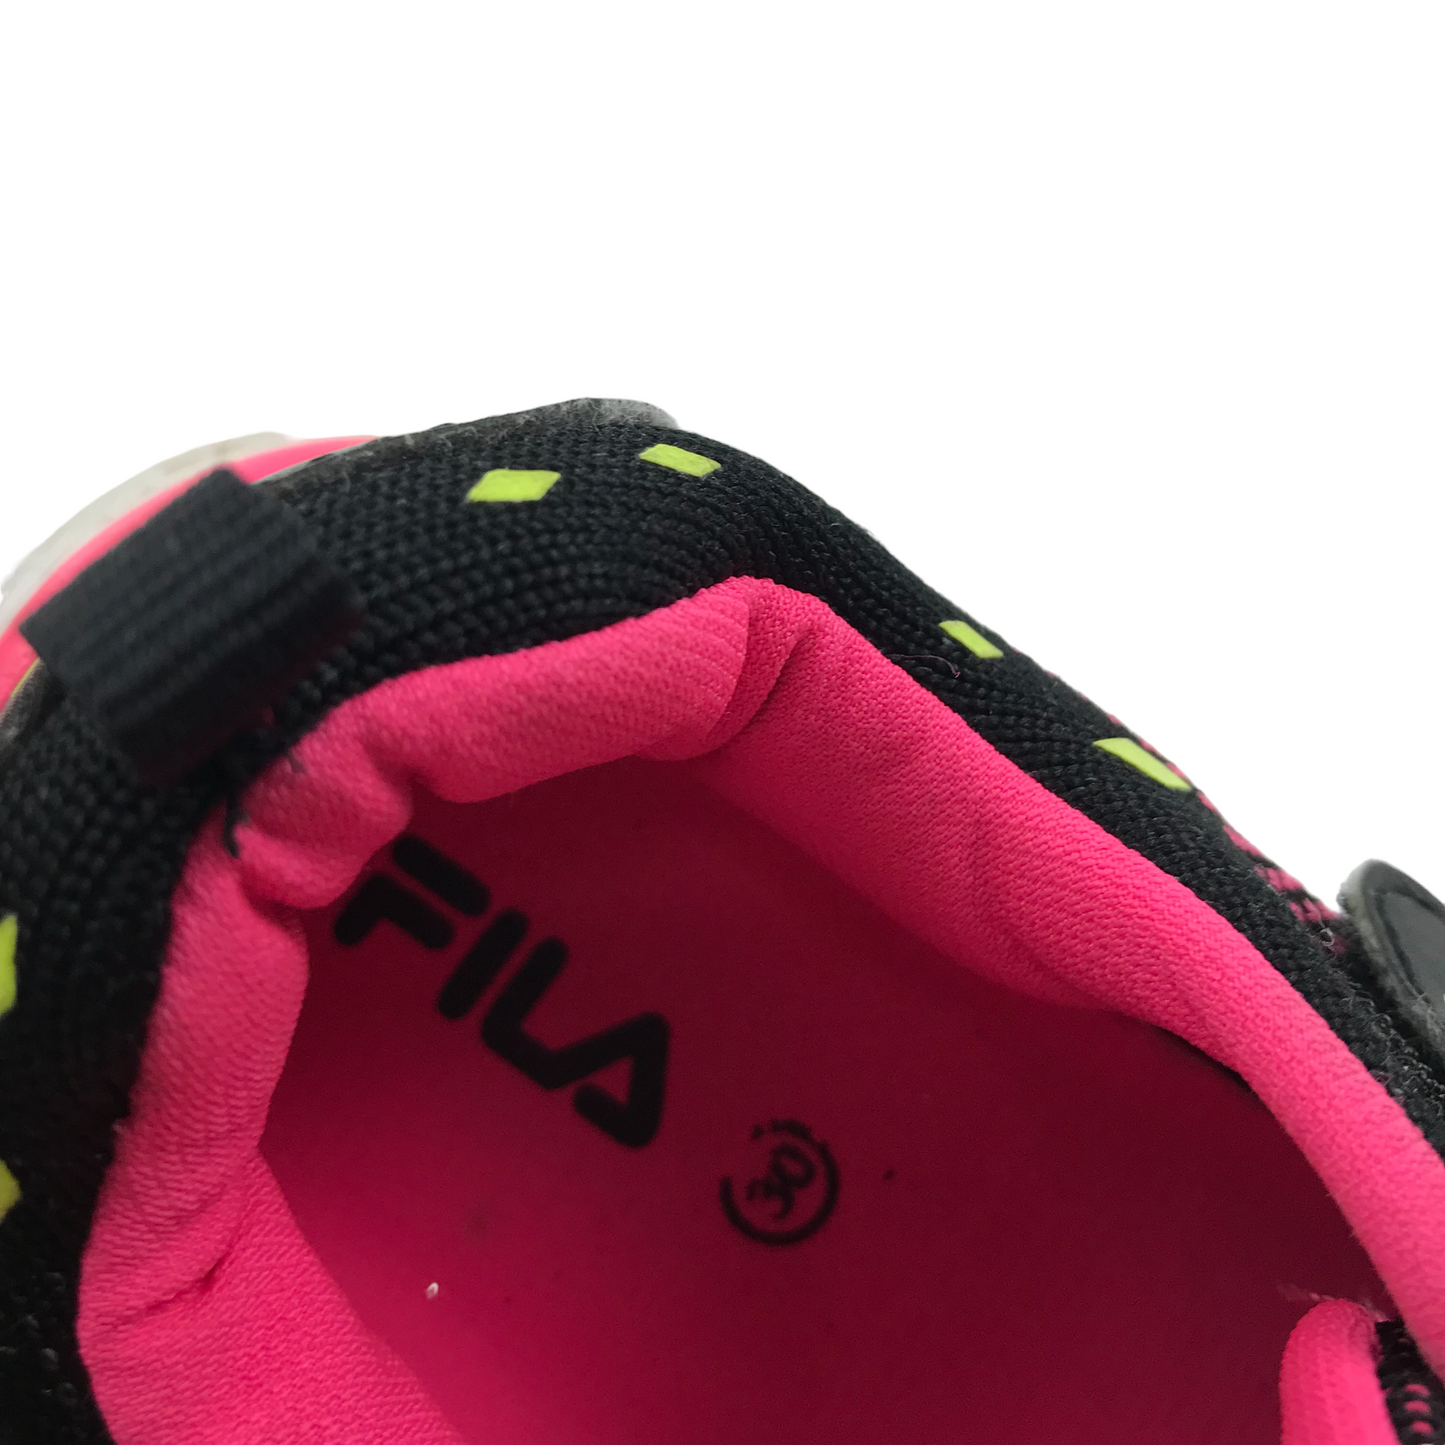 Fila Black and Pink Trainers Shoe Size 11 junior